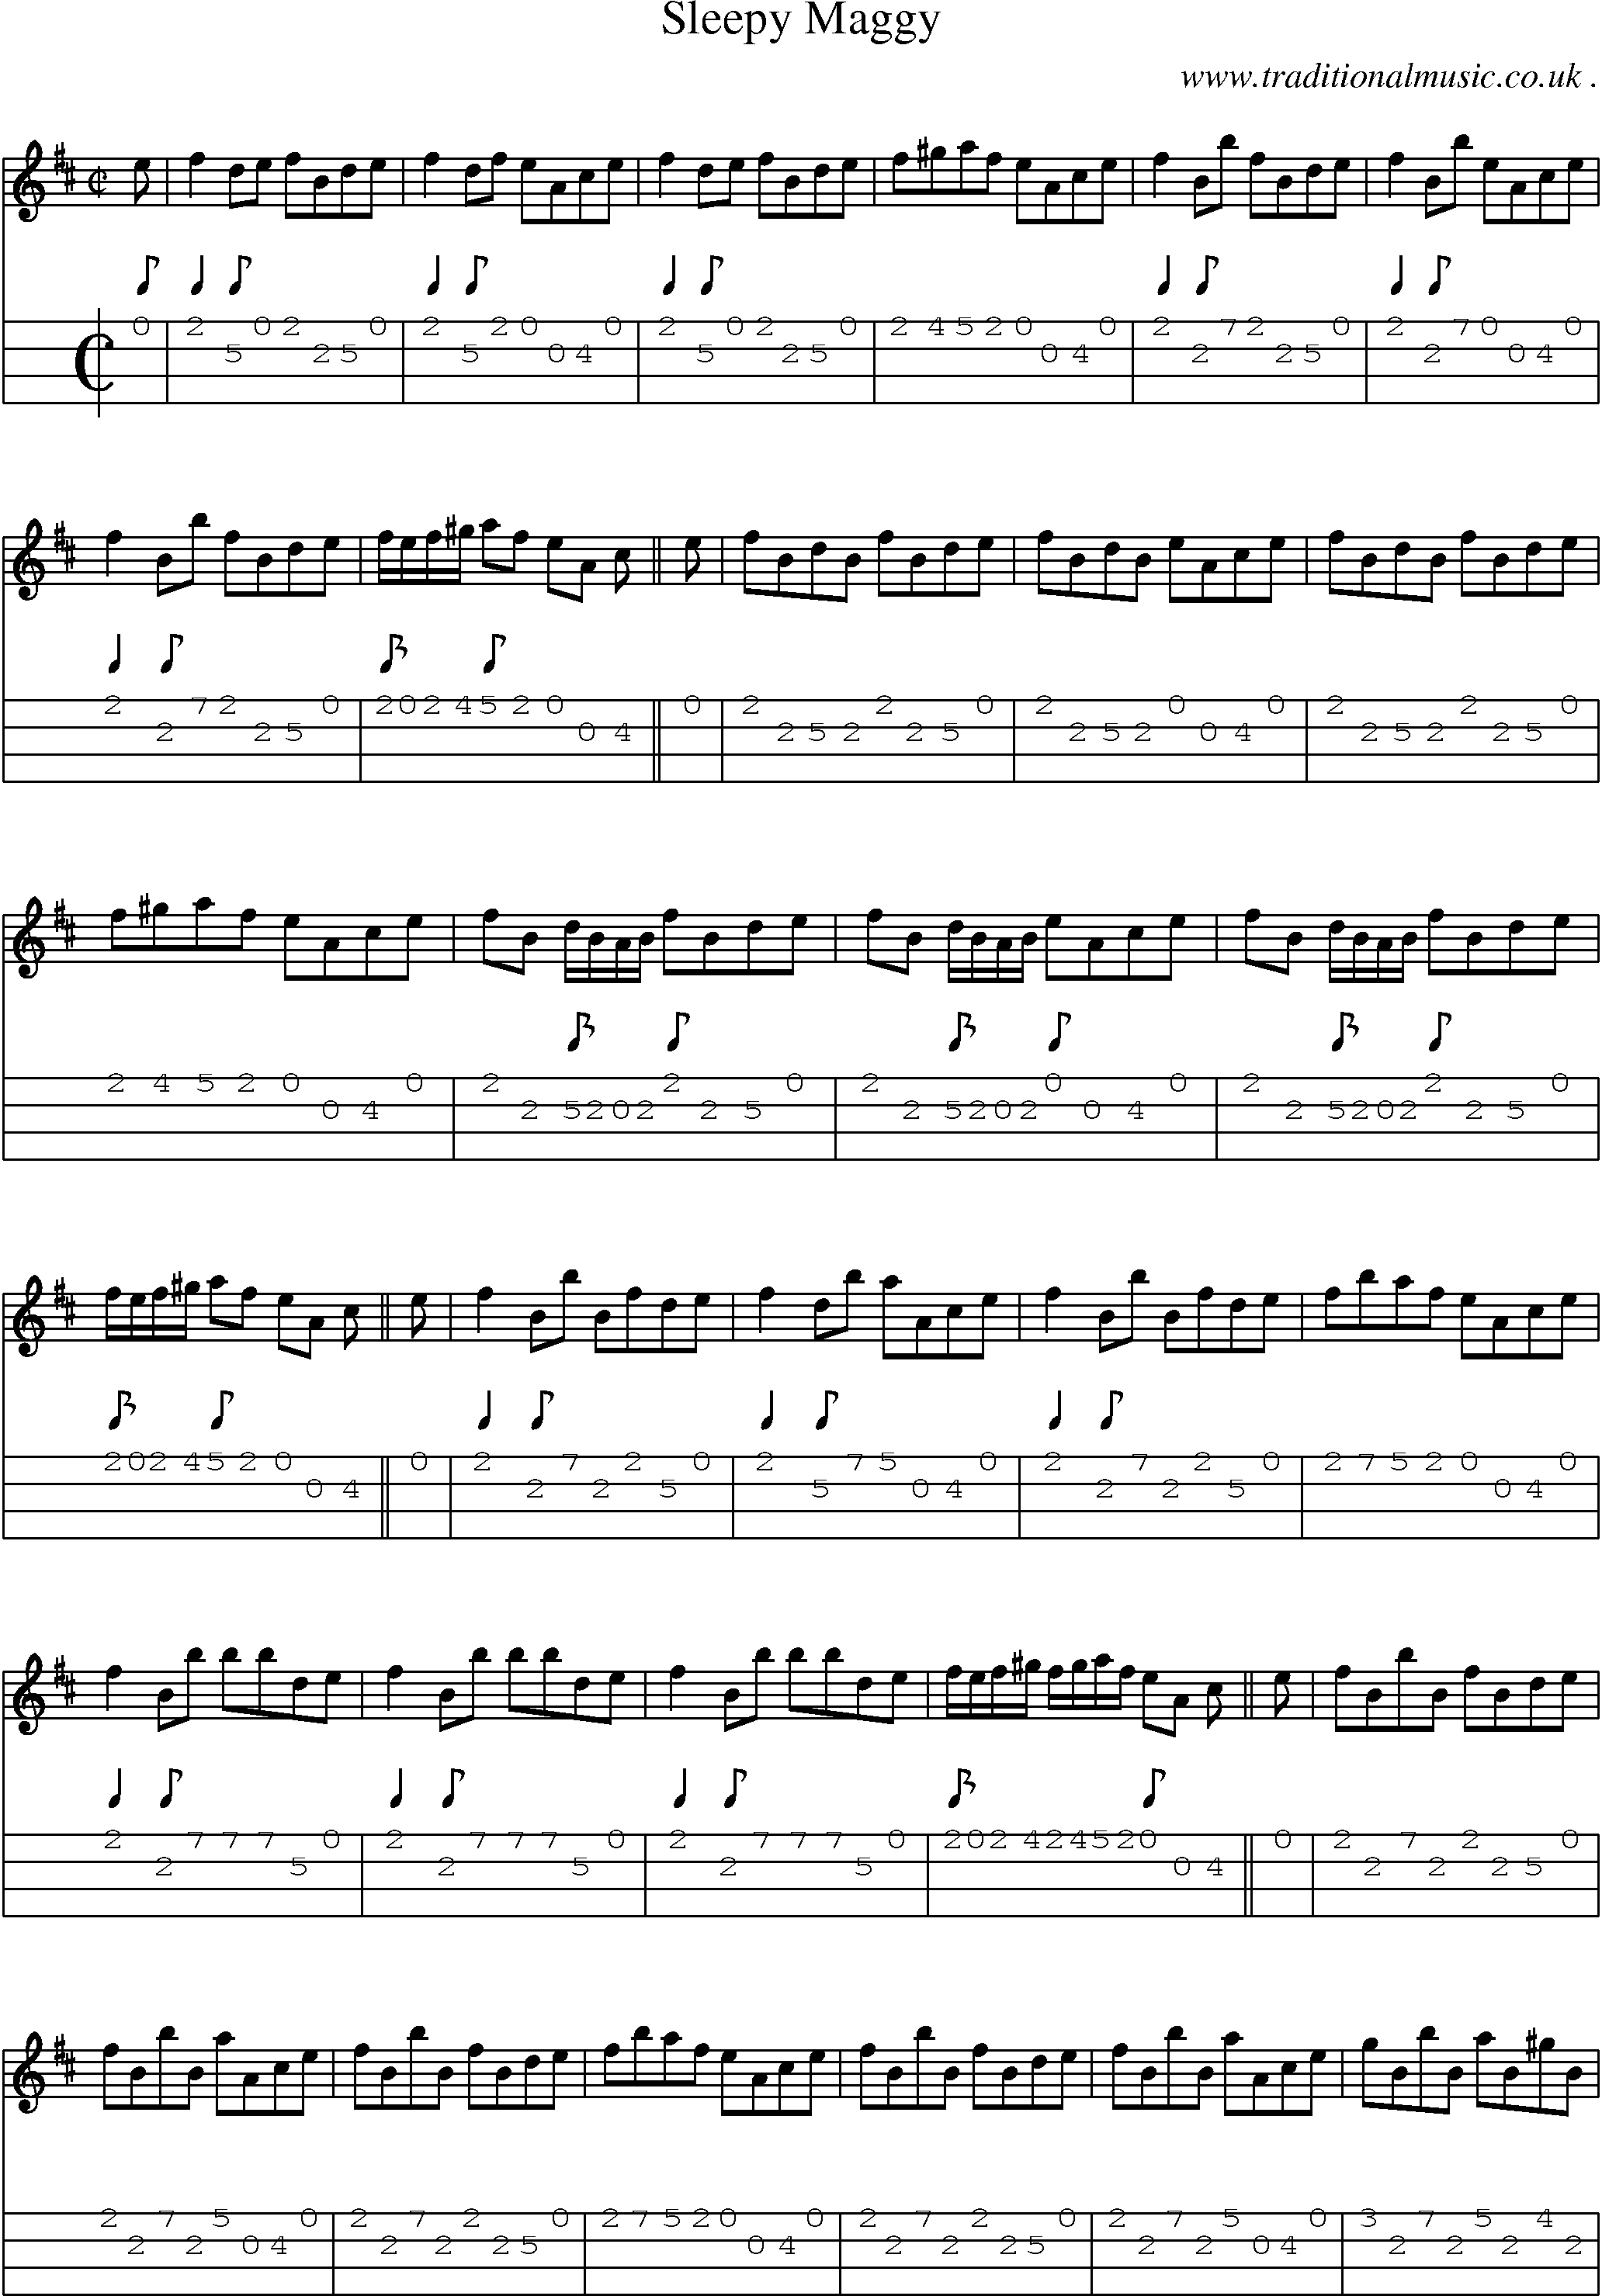 Sheet-music  score, Chords and Mandolin Tabs for Sleepy Maggy